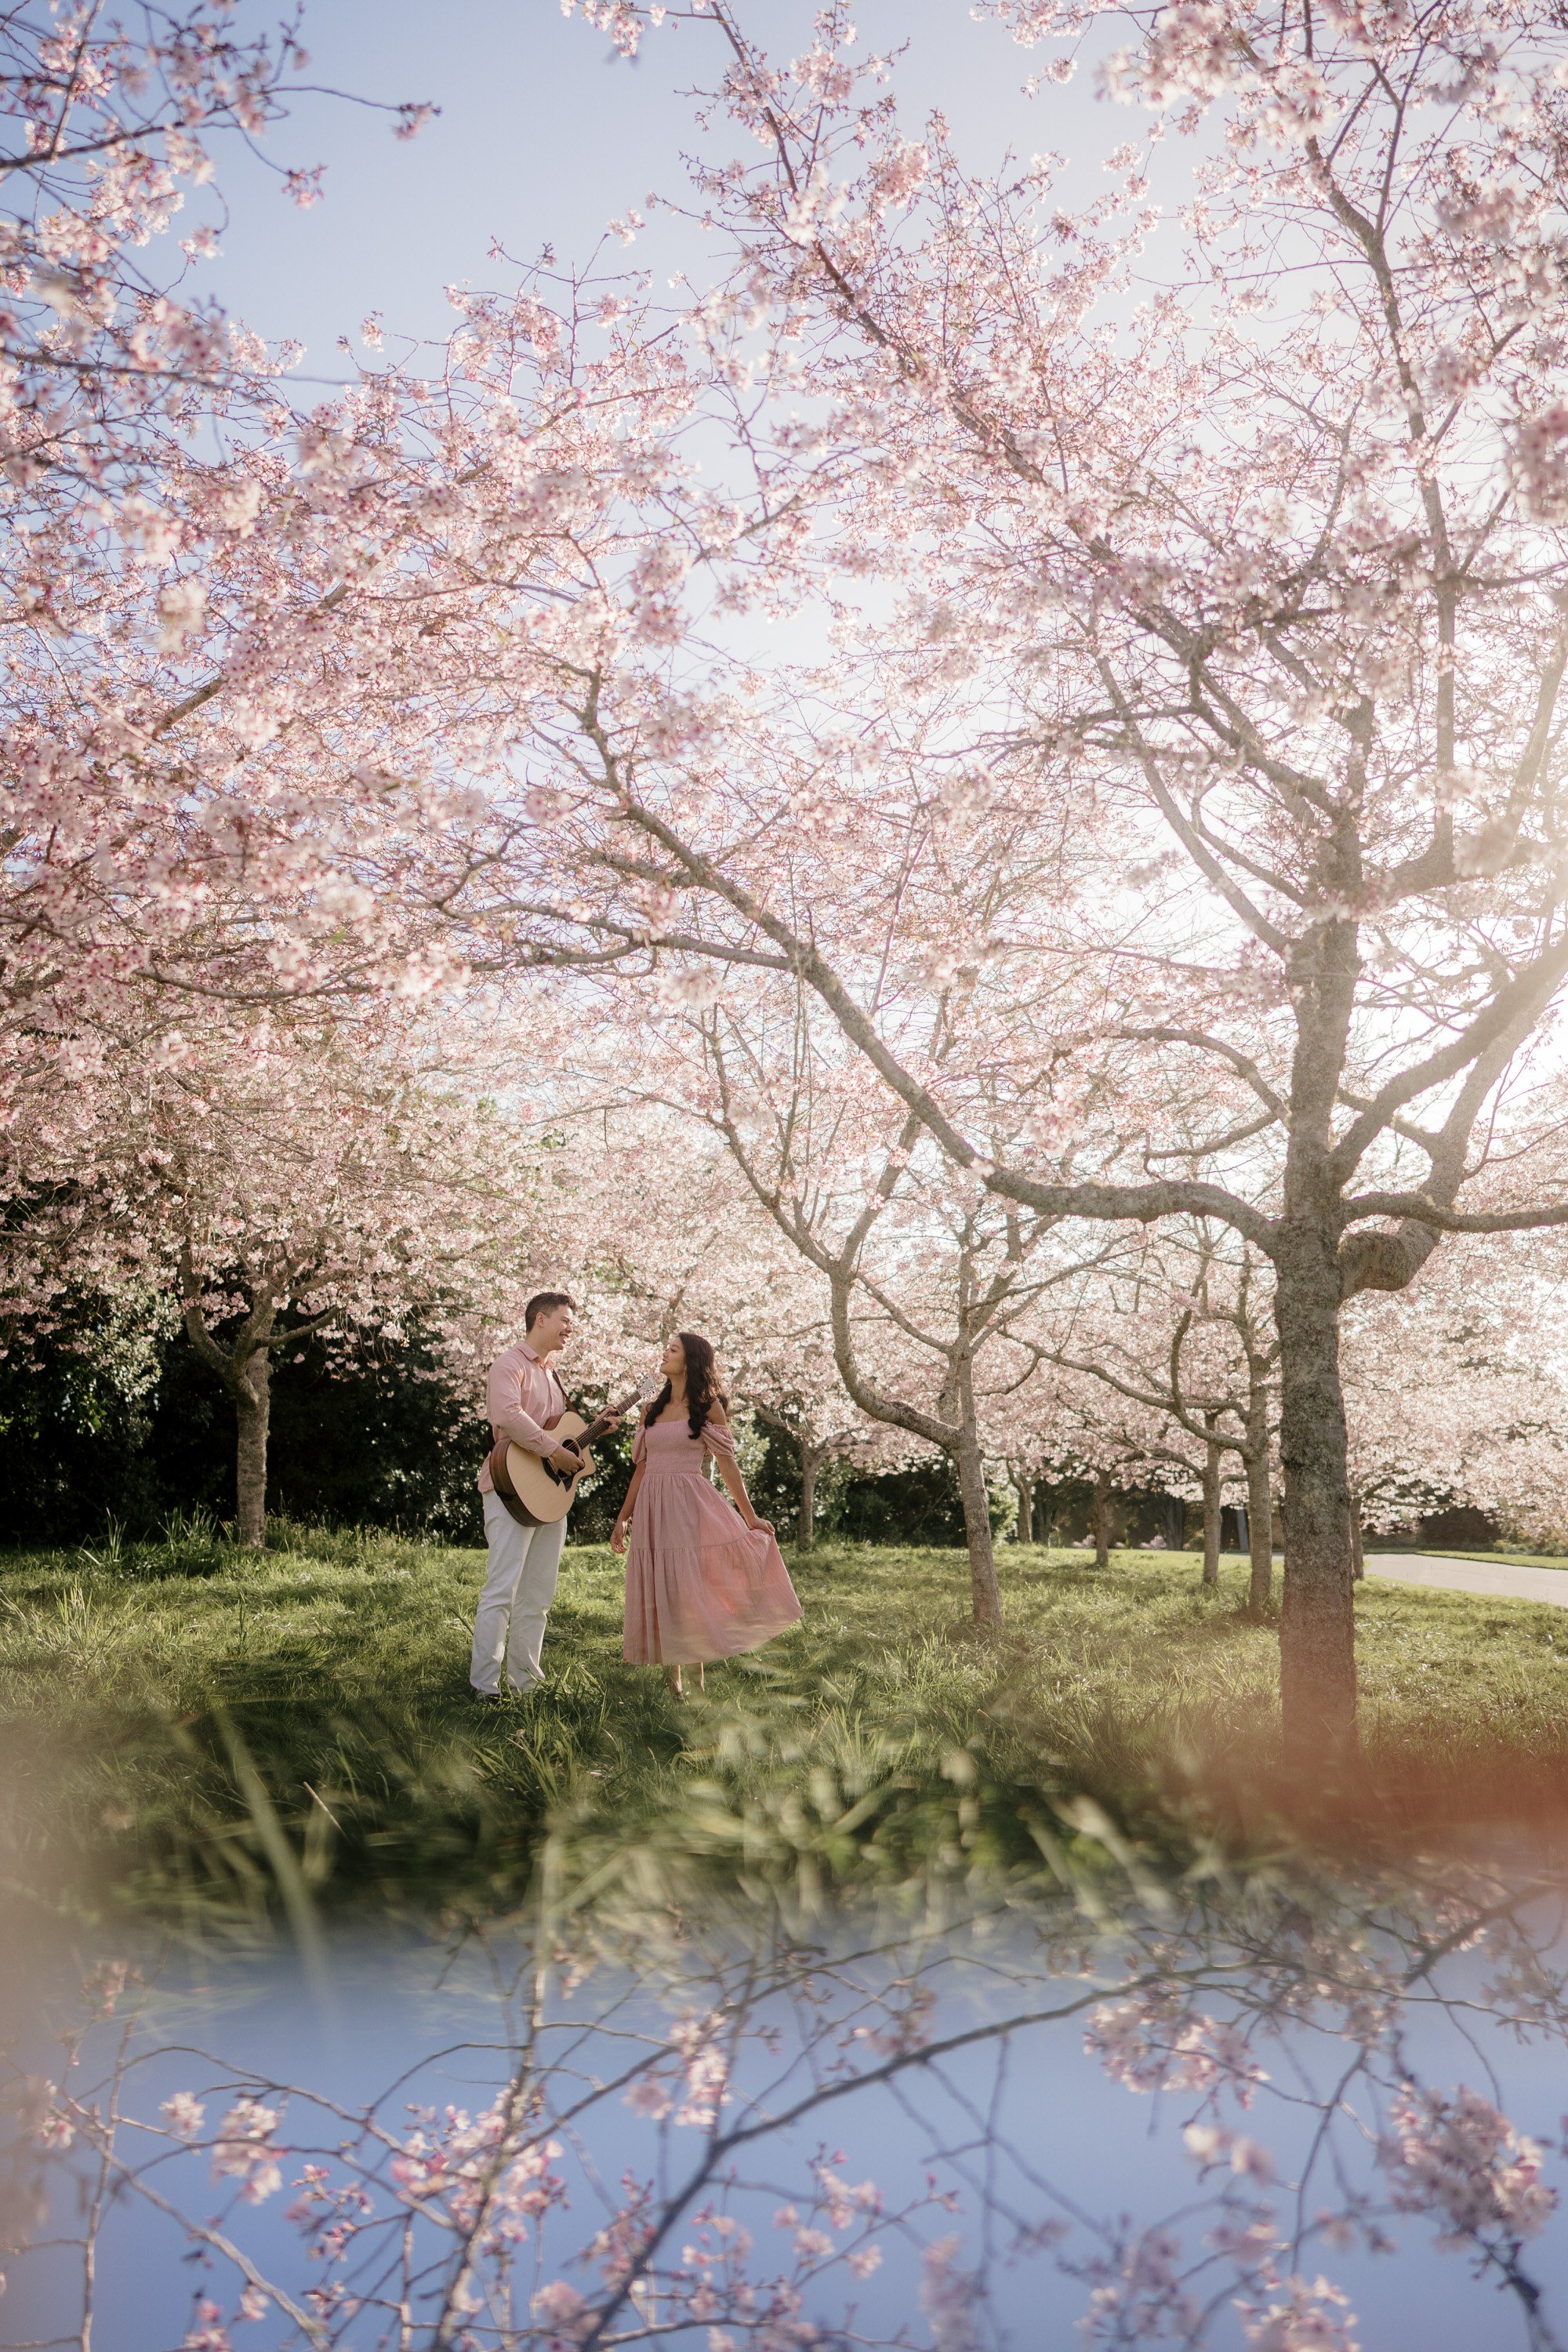 nate-and-thea-singers-duo-2023-top-auckland-wedding-phtographer-photography-videography-film-new-zealand-NZ-best-band-cherry-blossom-botanical-garden-engagement-elopement-dear-white-productions (13).jpg